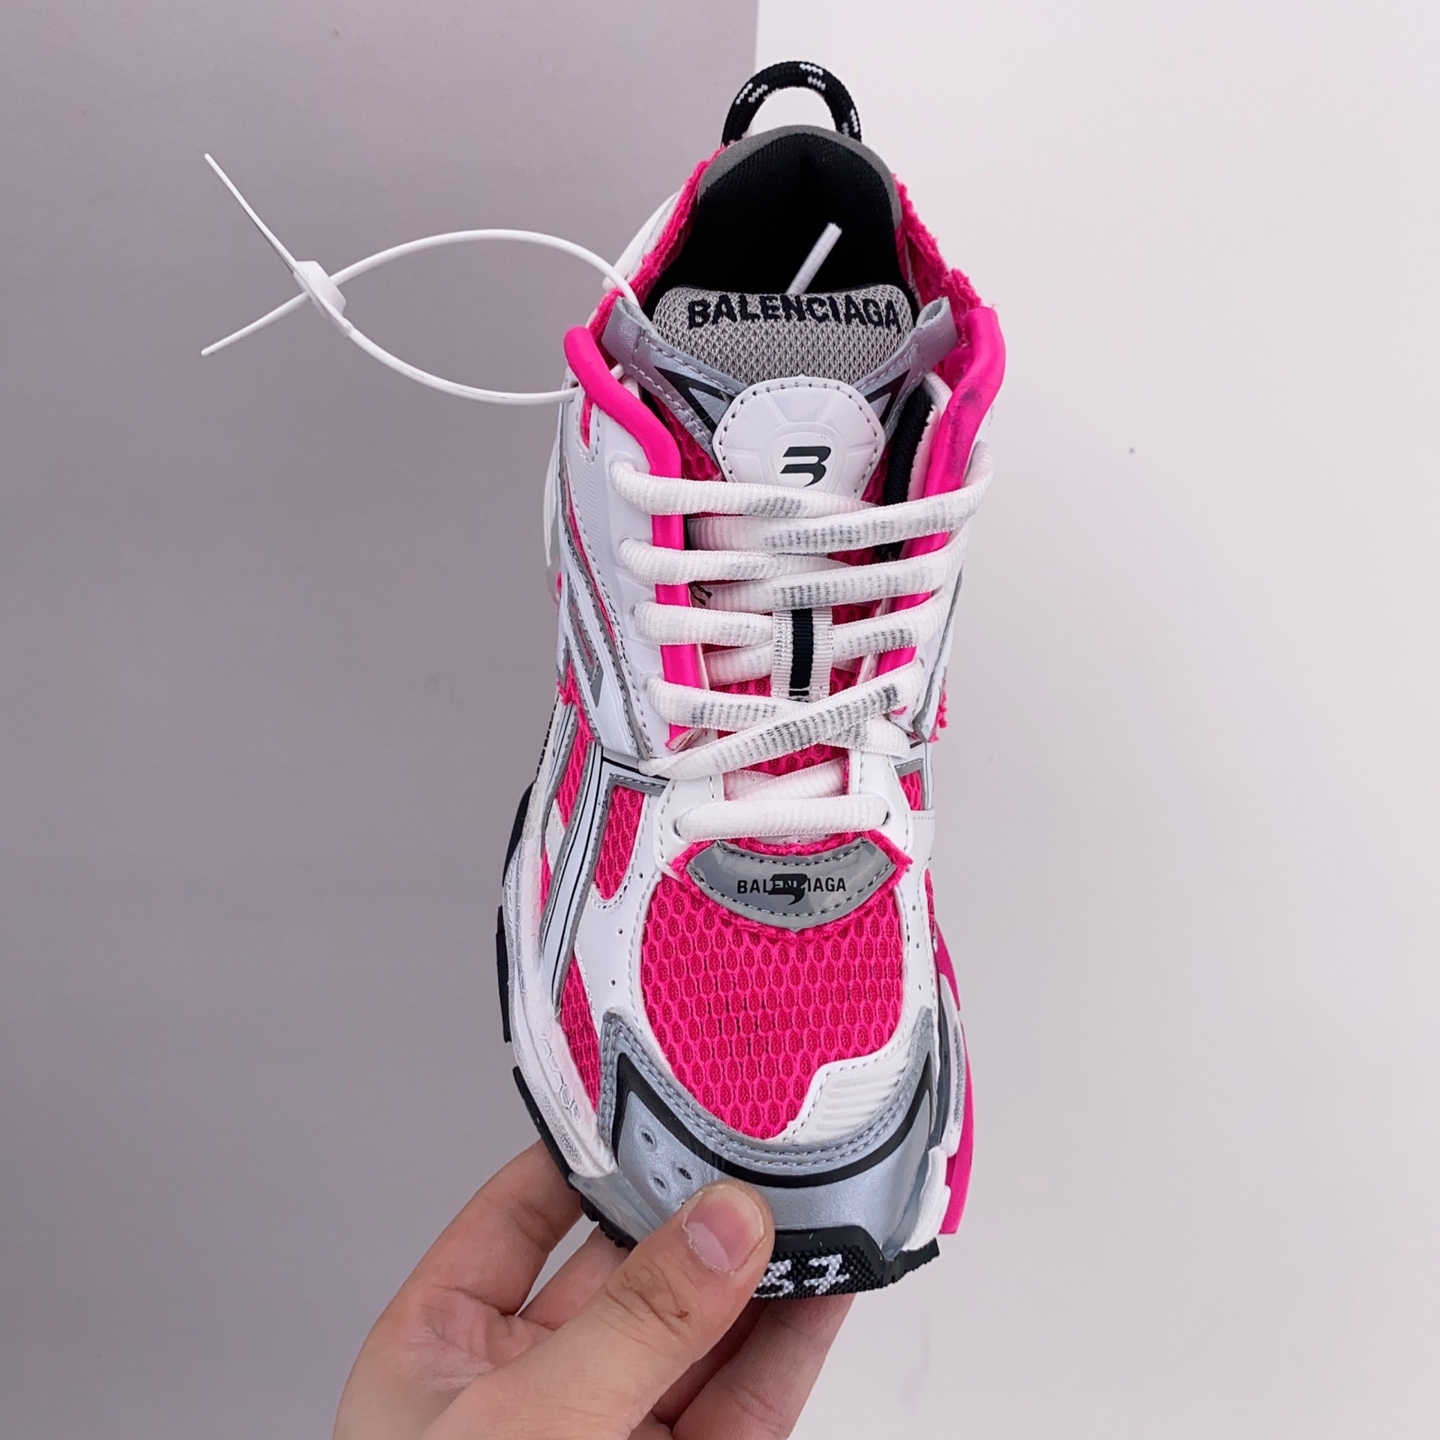 Balenciaga Wmns Runner Sneaker 'White Neon Pink' 677402 W3RBN 9155 - Stylish and Vibrant Women's Shoes